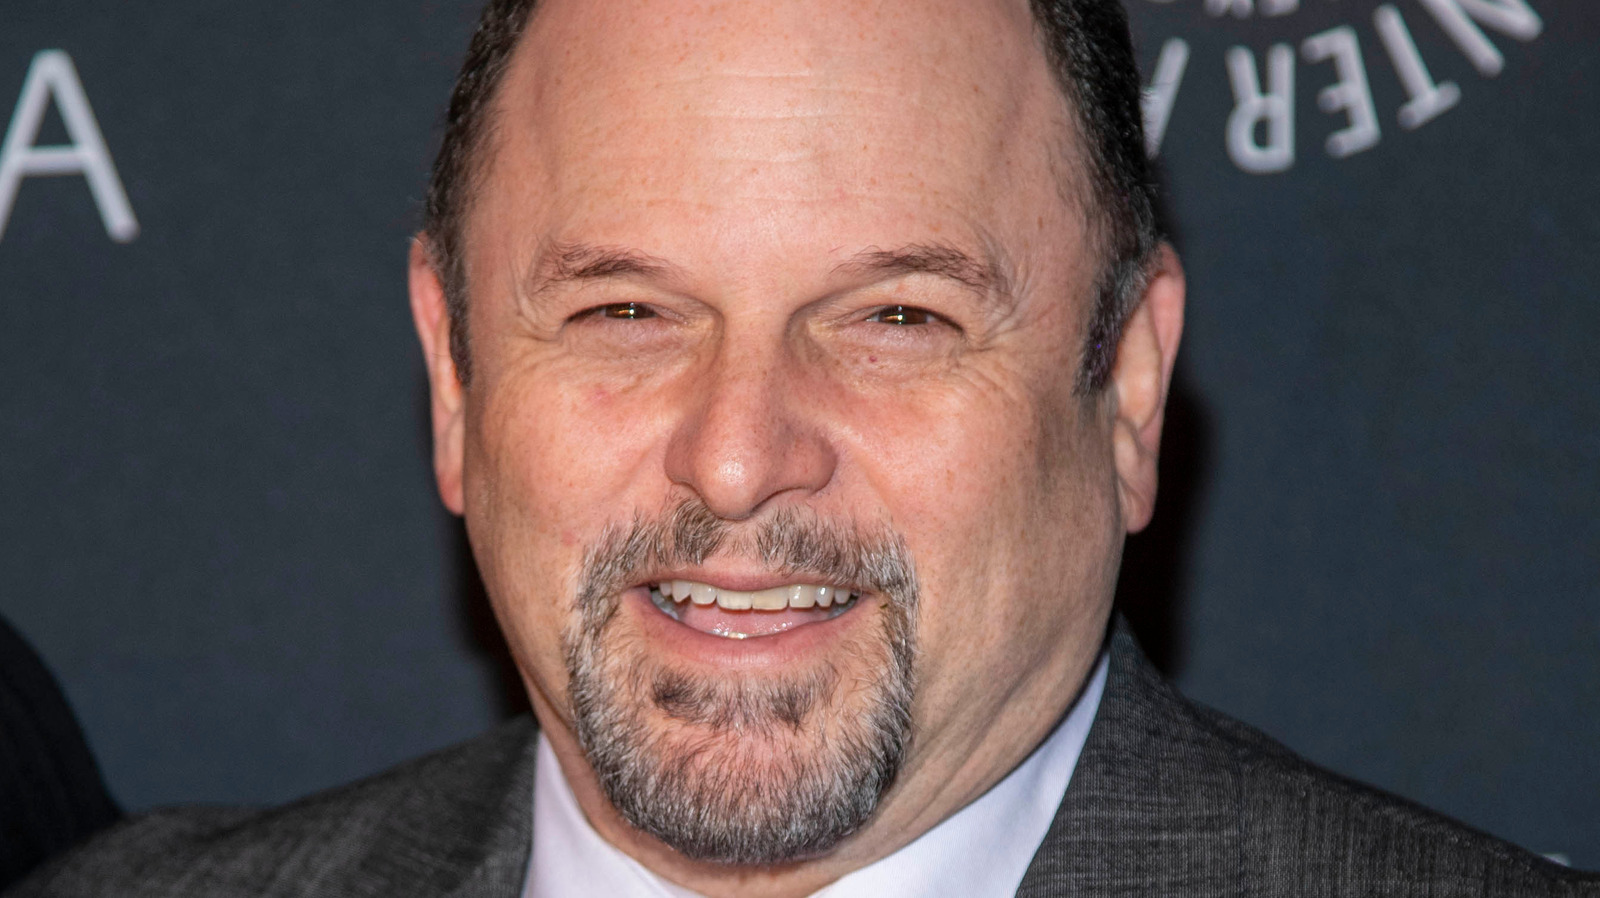 Jason Alexander’s Thoughts On This Bathroom Design Has Us All Thinking The Same Thing